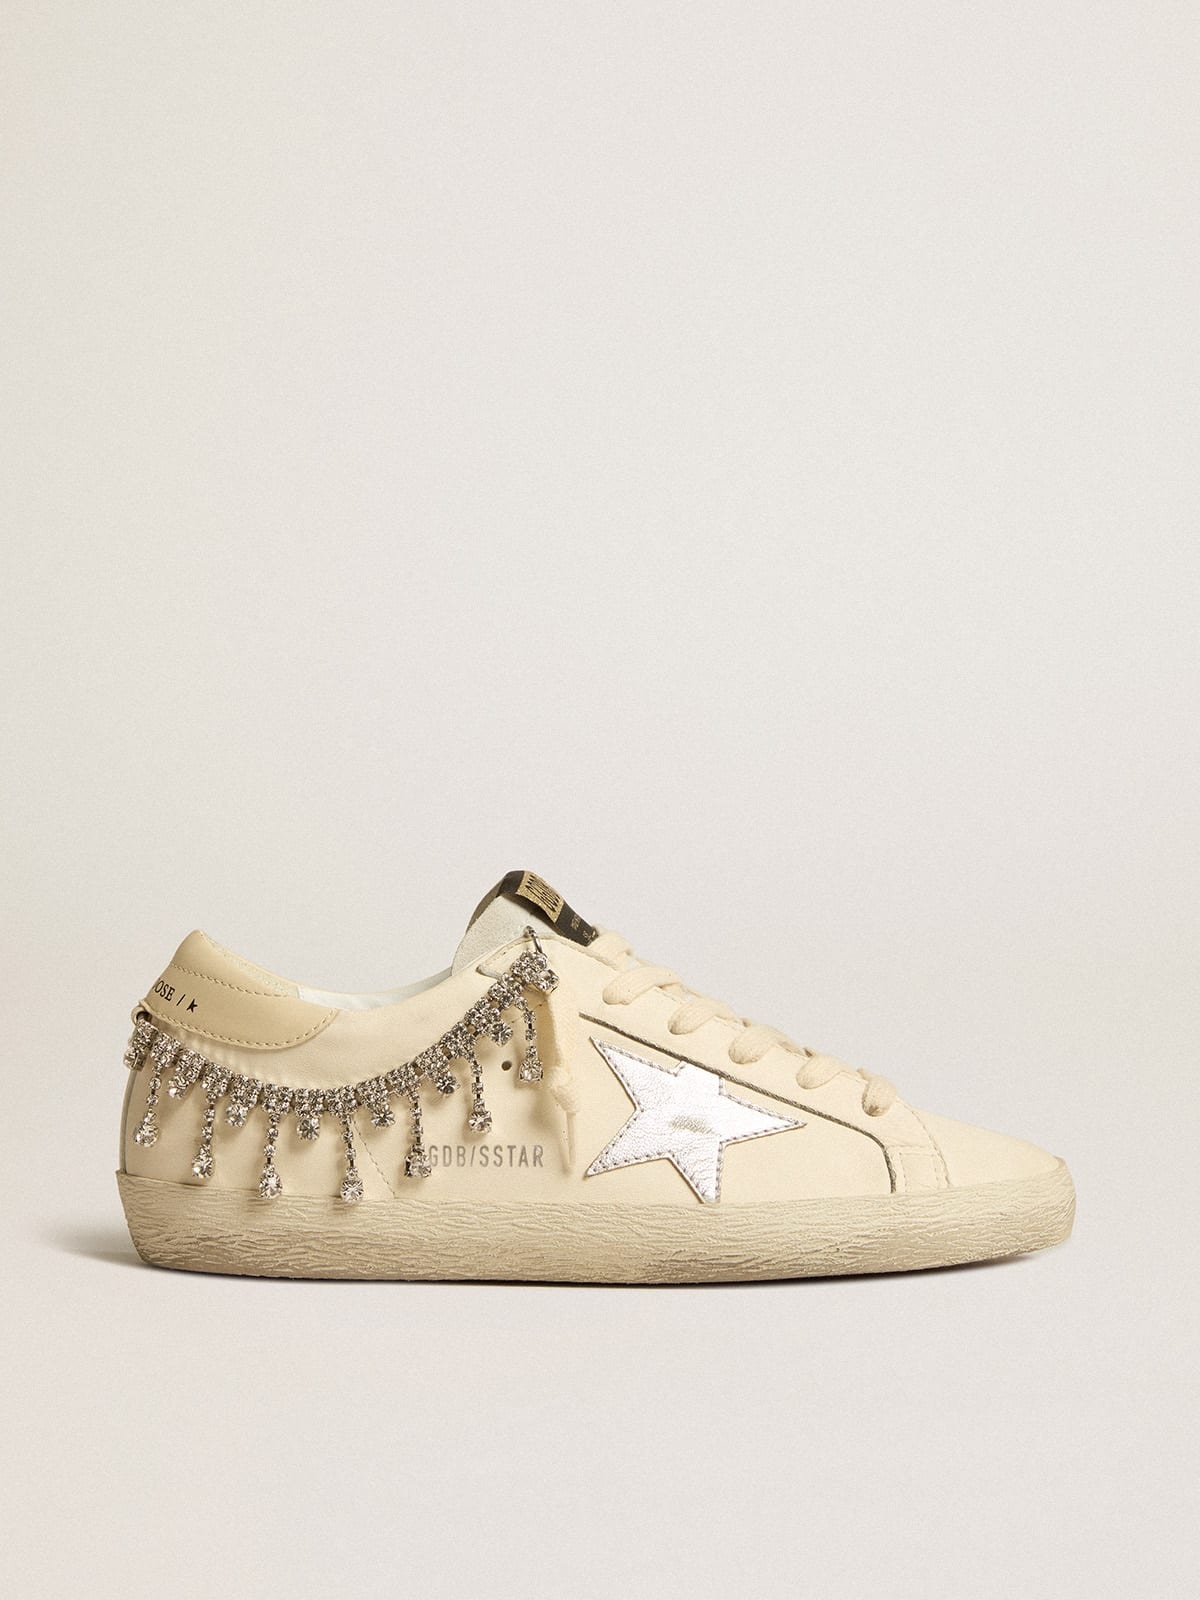 Super-Star LTD in nappa leather with silver metallic leather star and rhinestones - 1